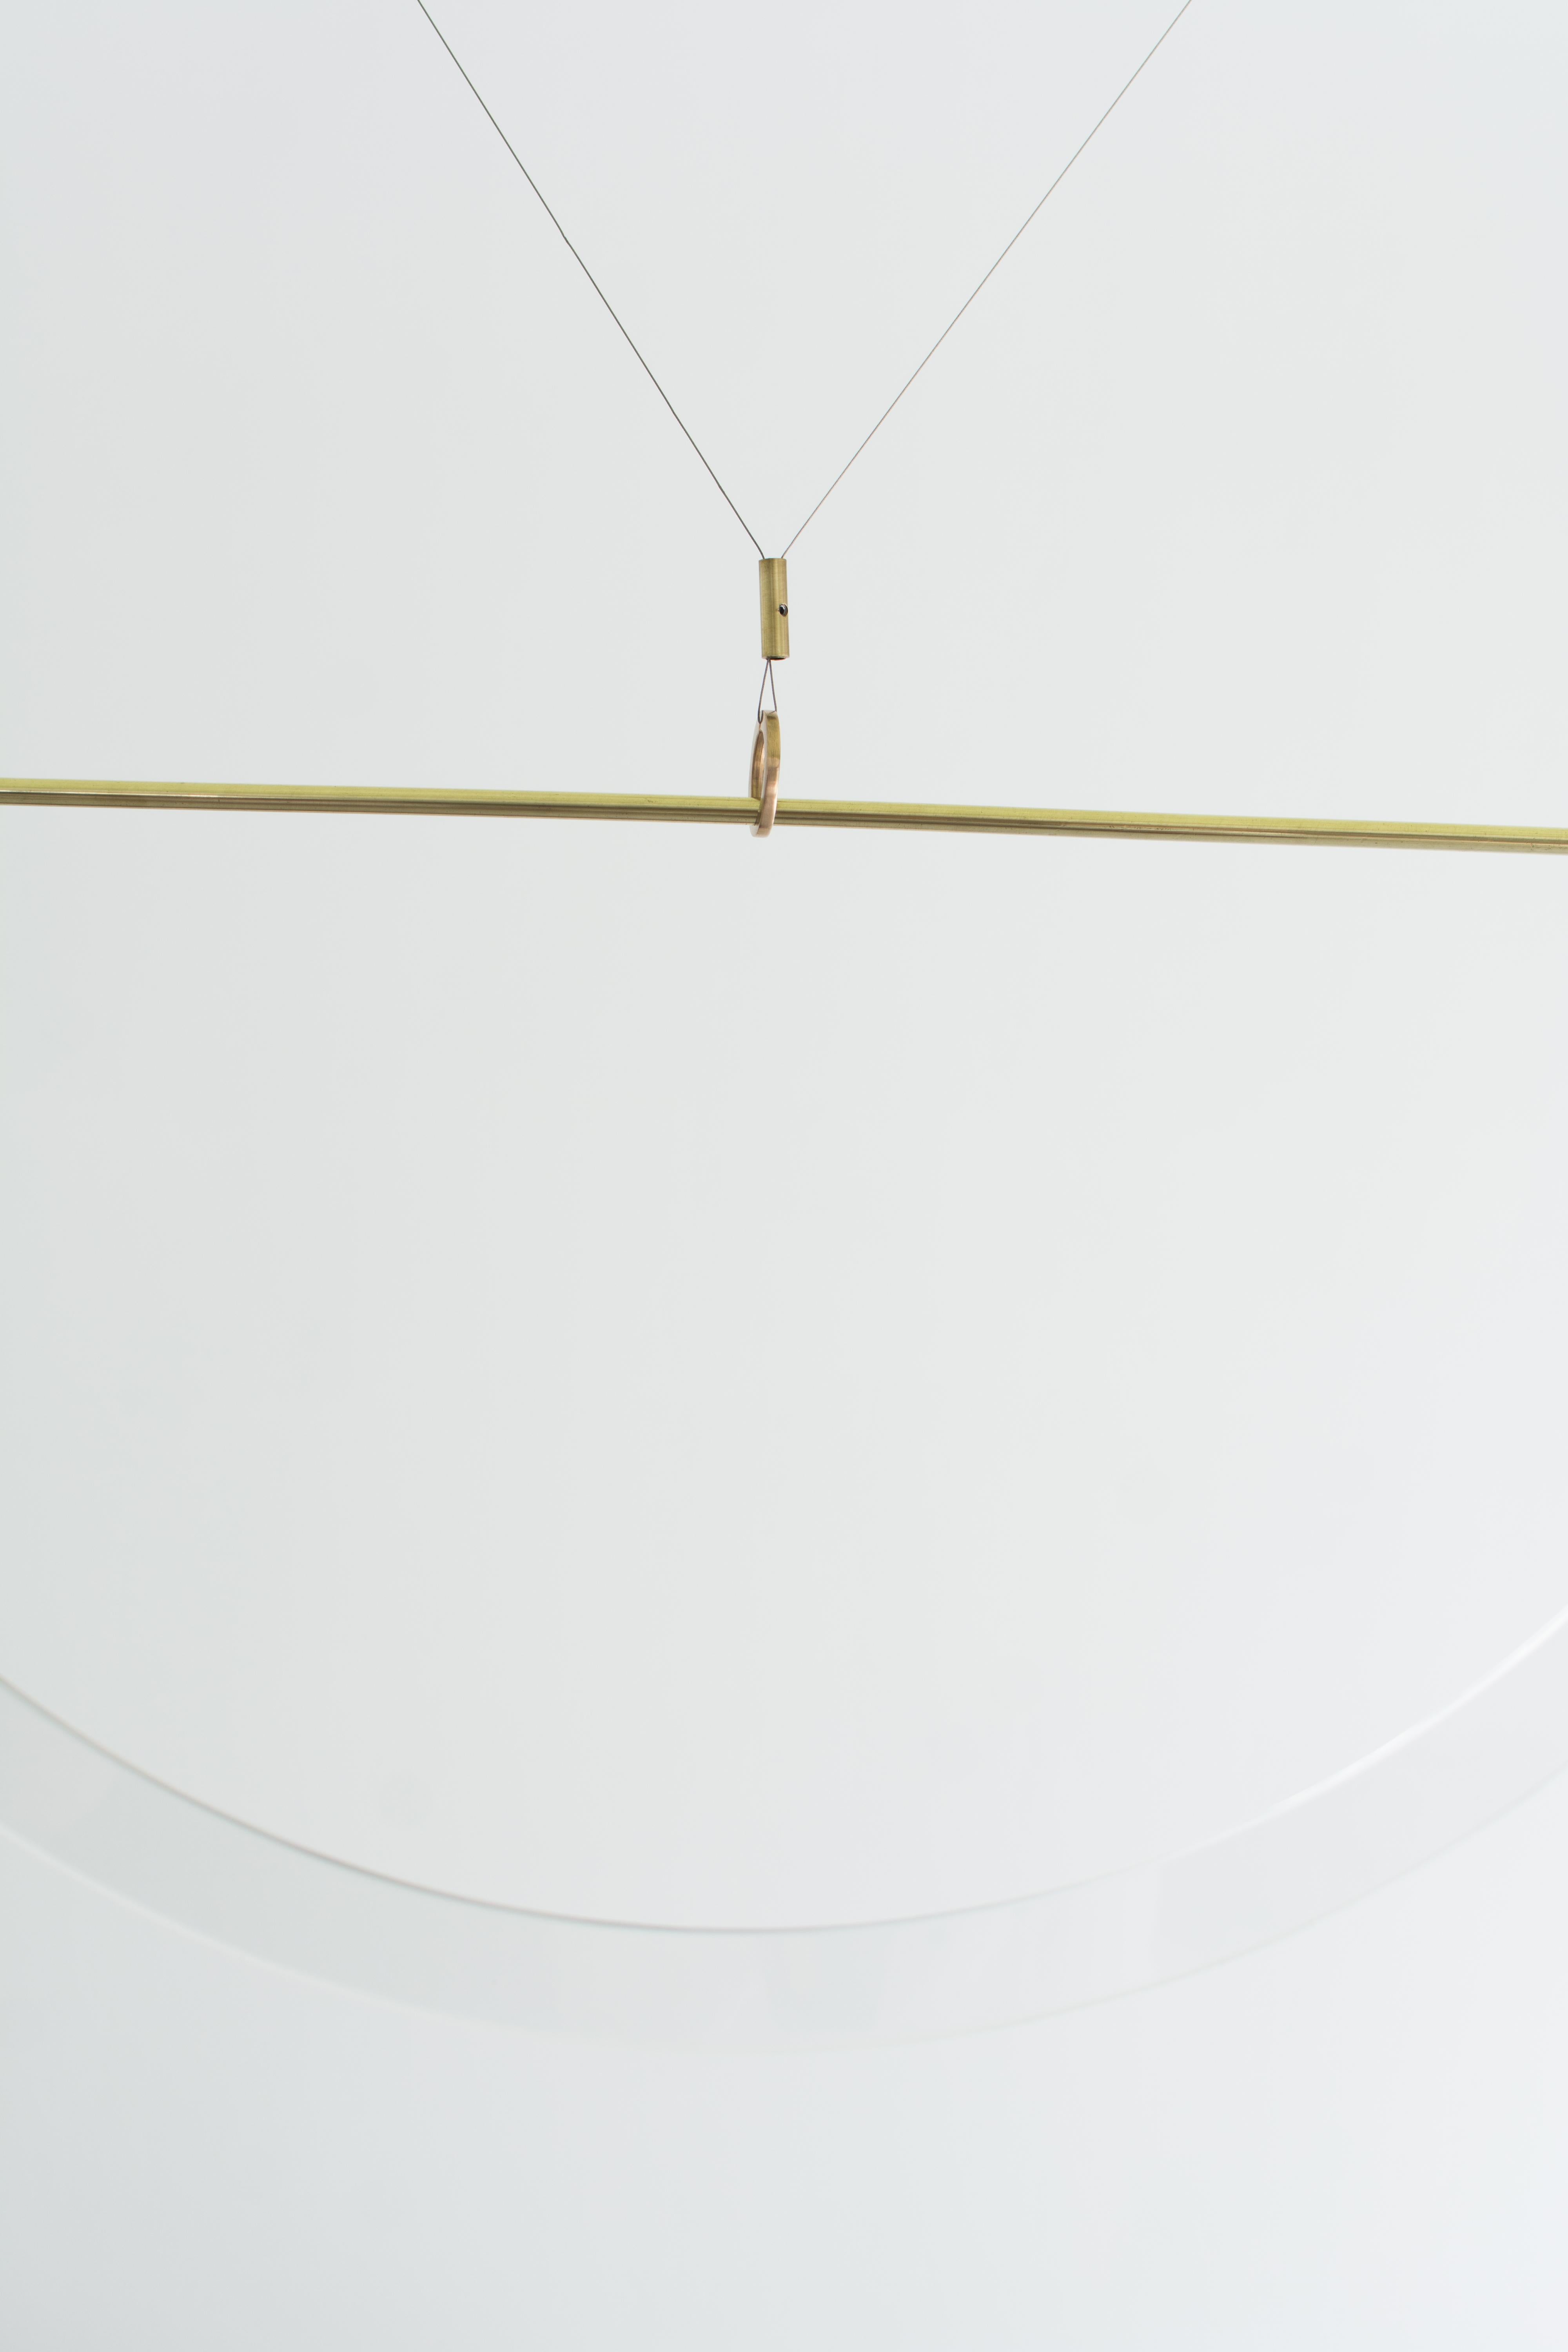 Brass Sculpted Light Suspension, Opus X, Periclis Frementitis In New Condition For Sale In Geneve, CH